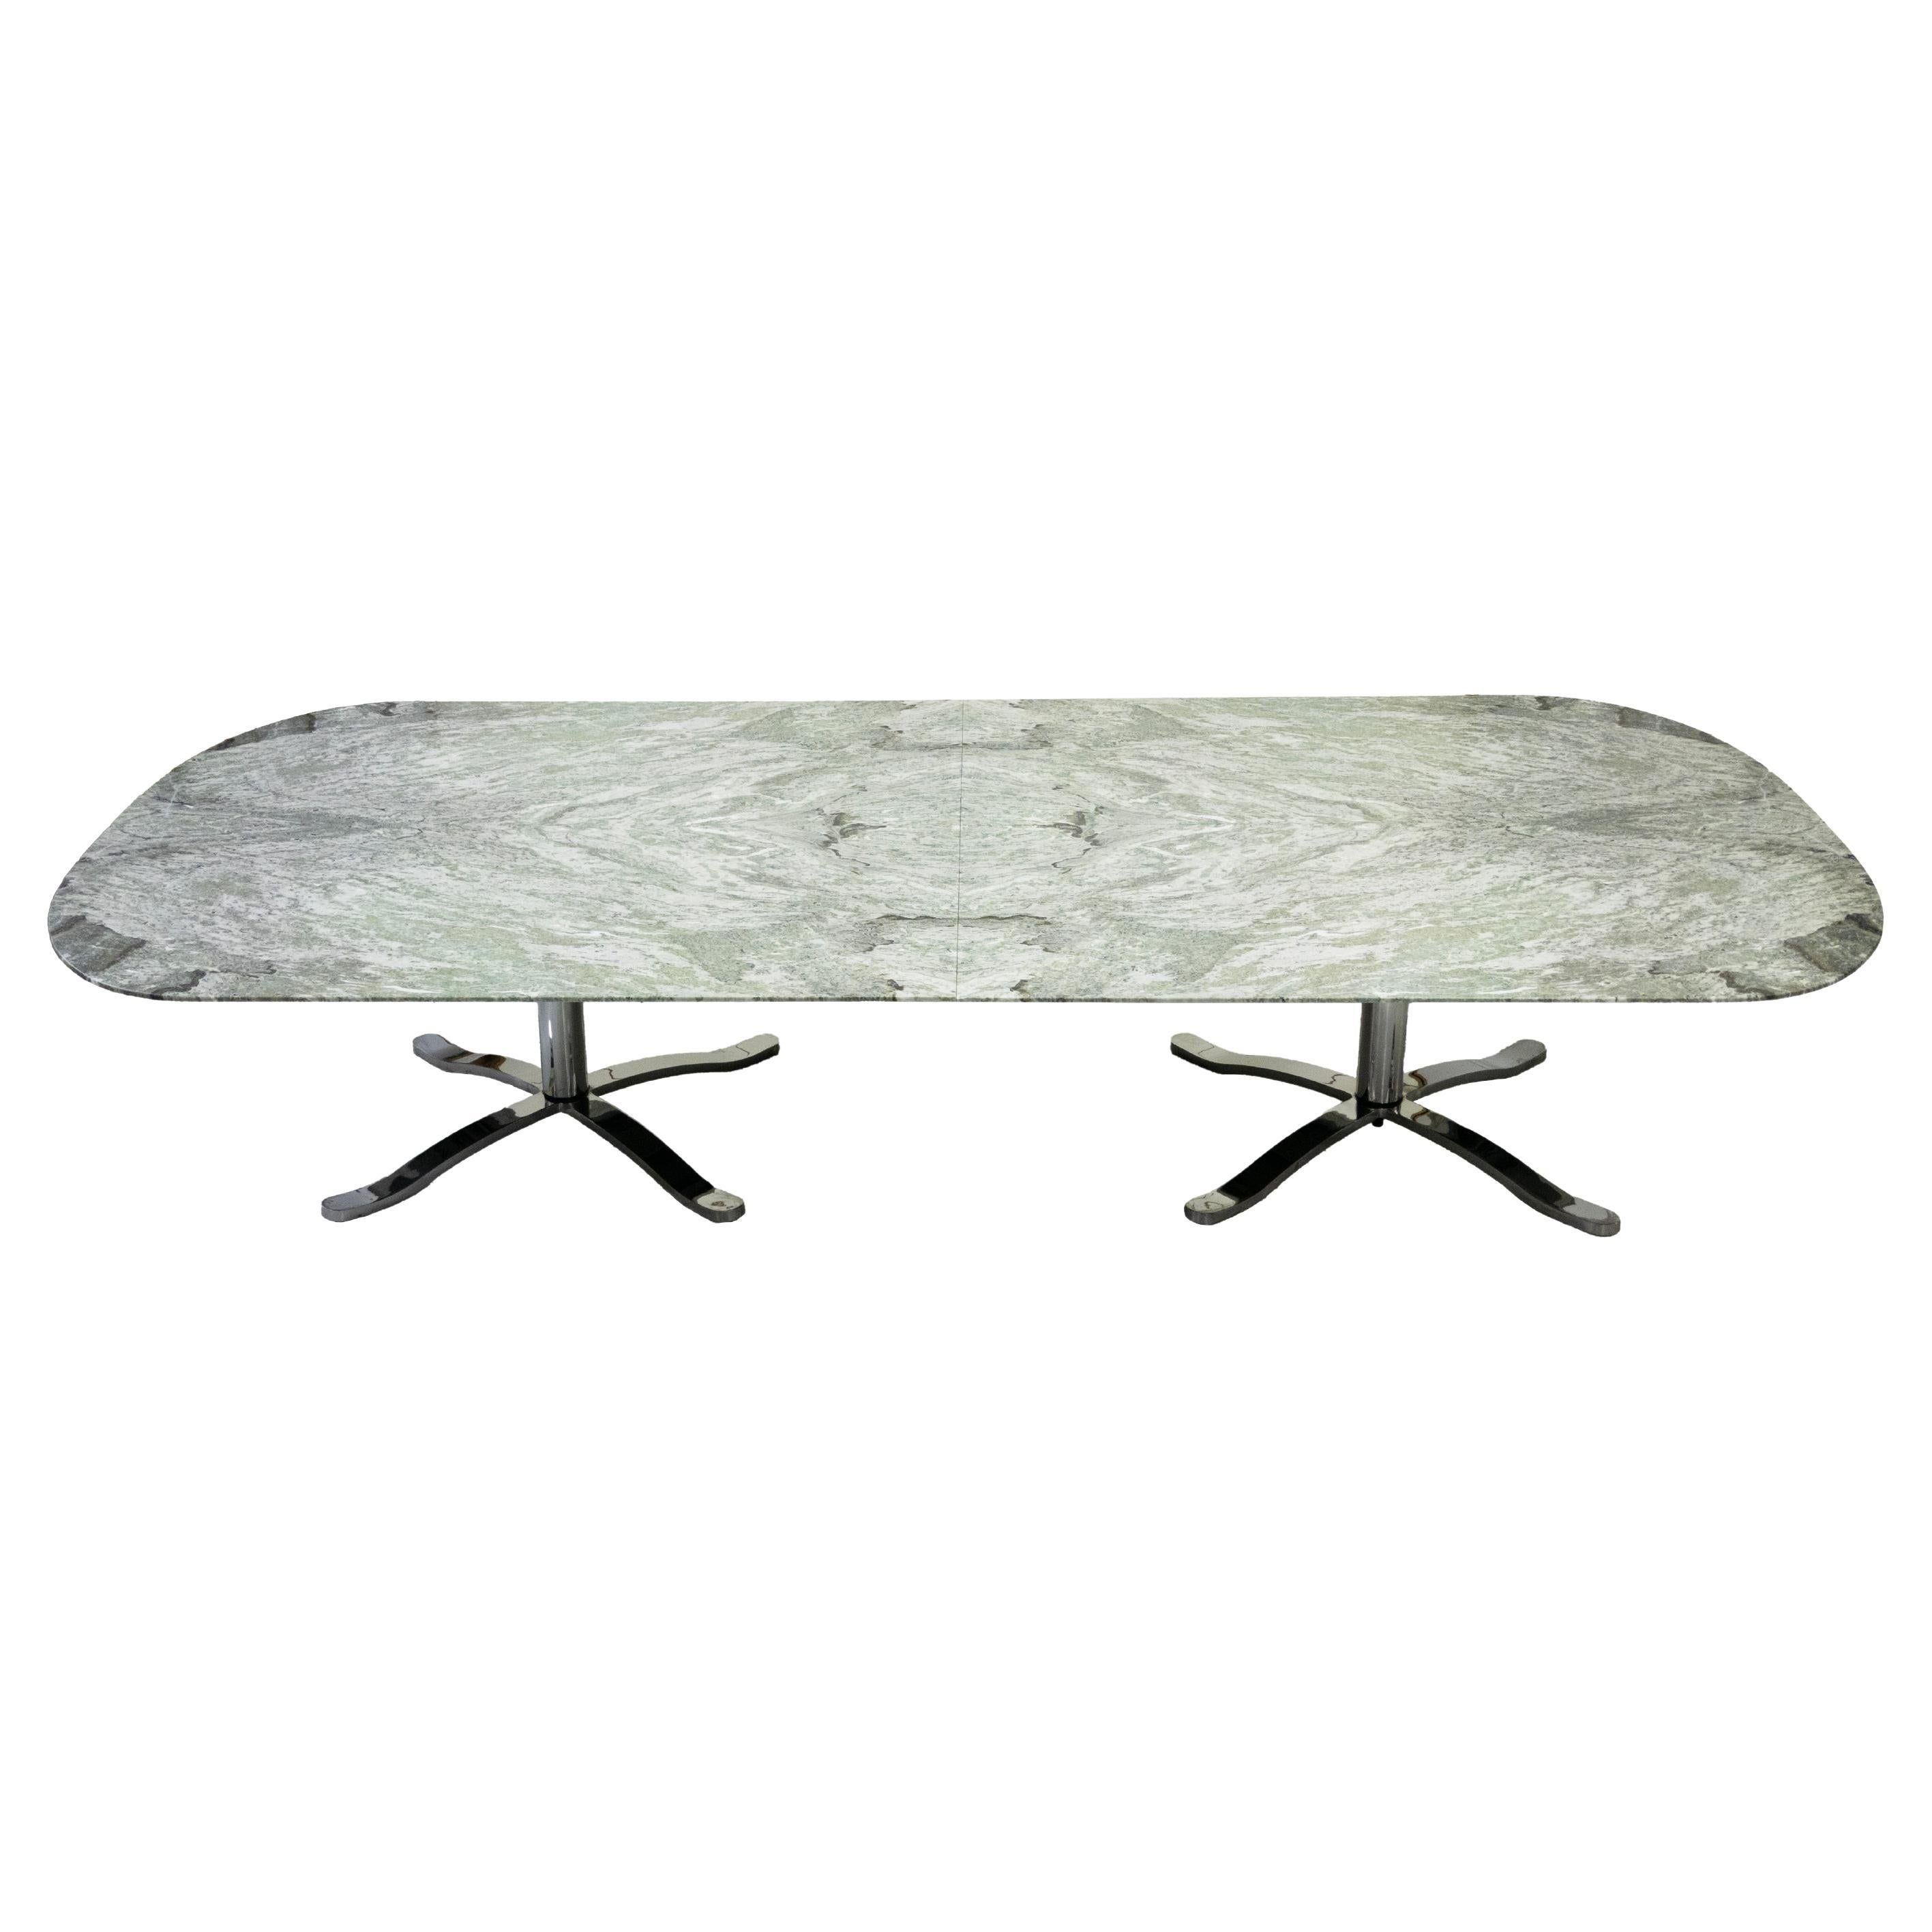 Nicos Zographos Monumental Table For Sale